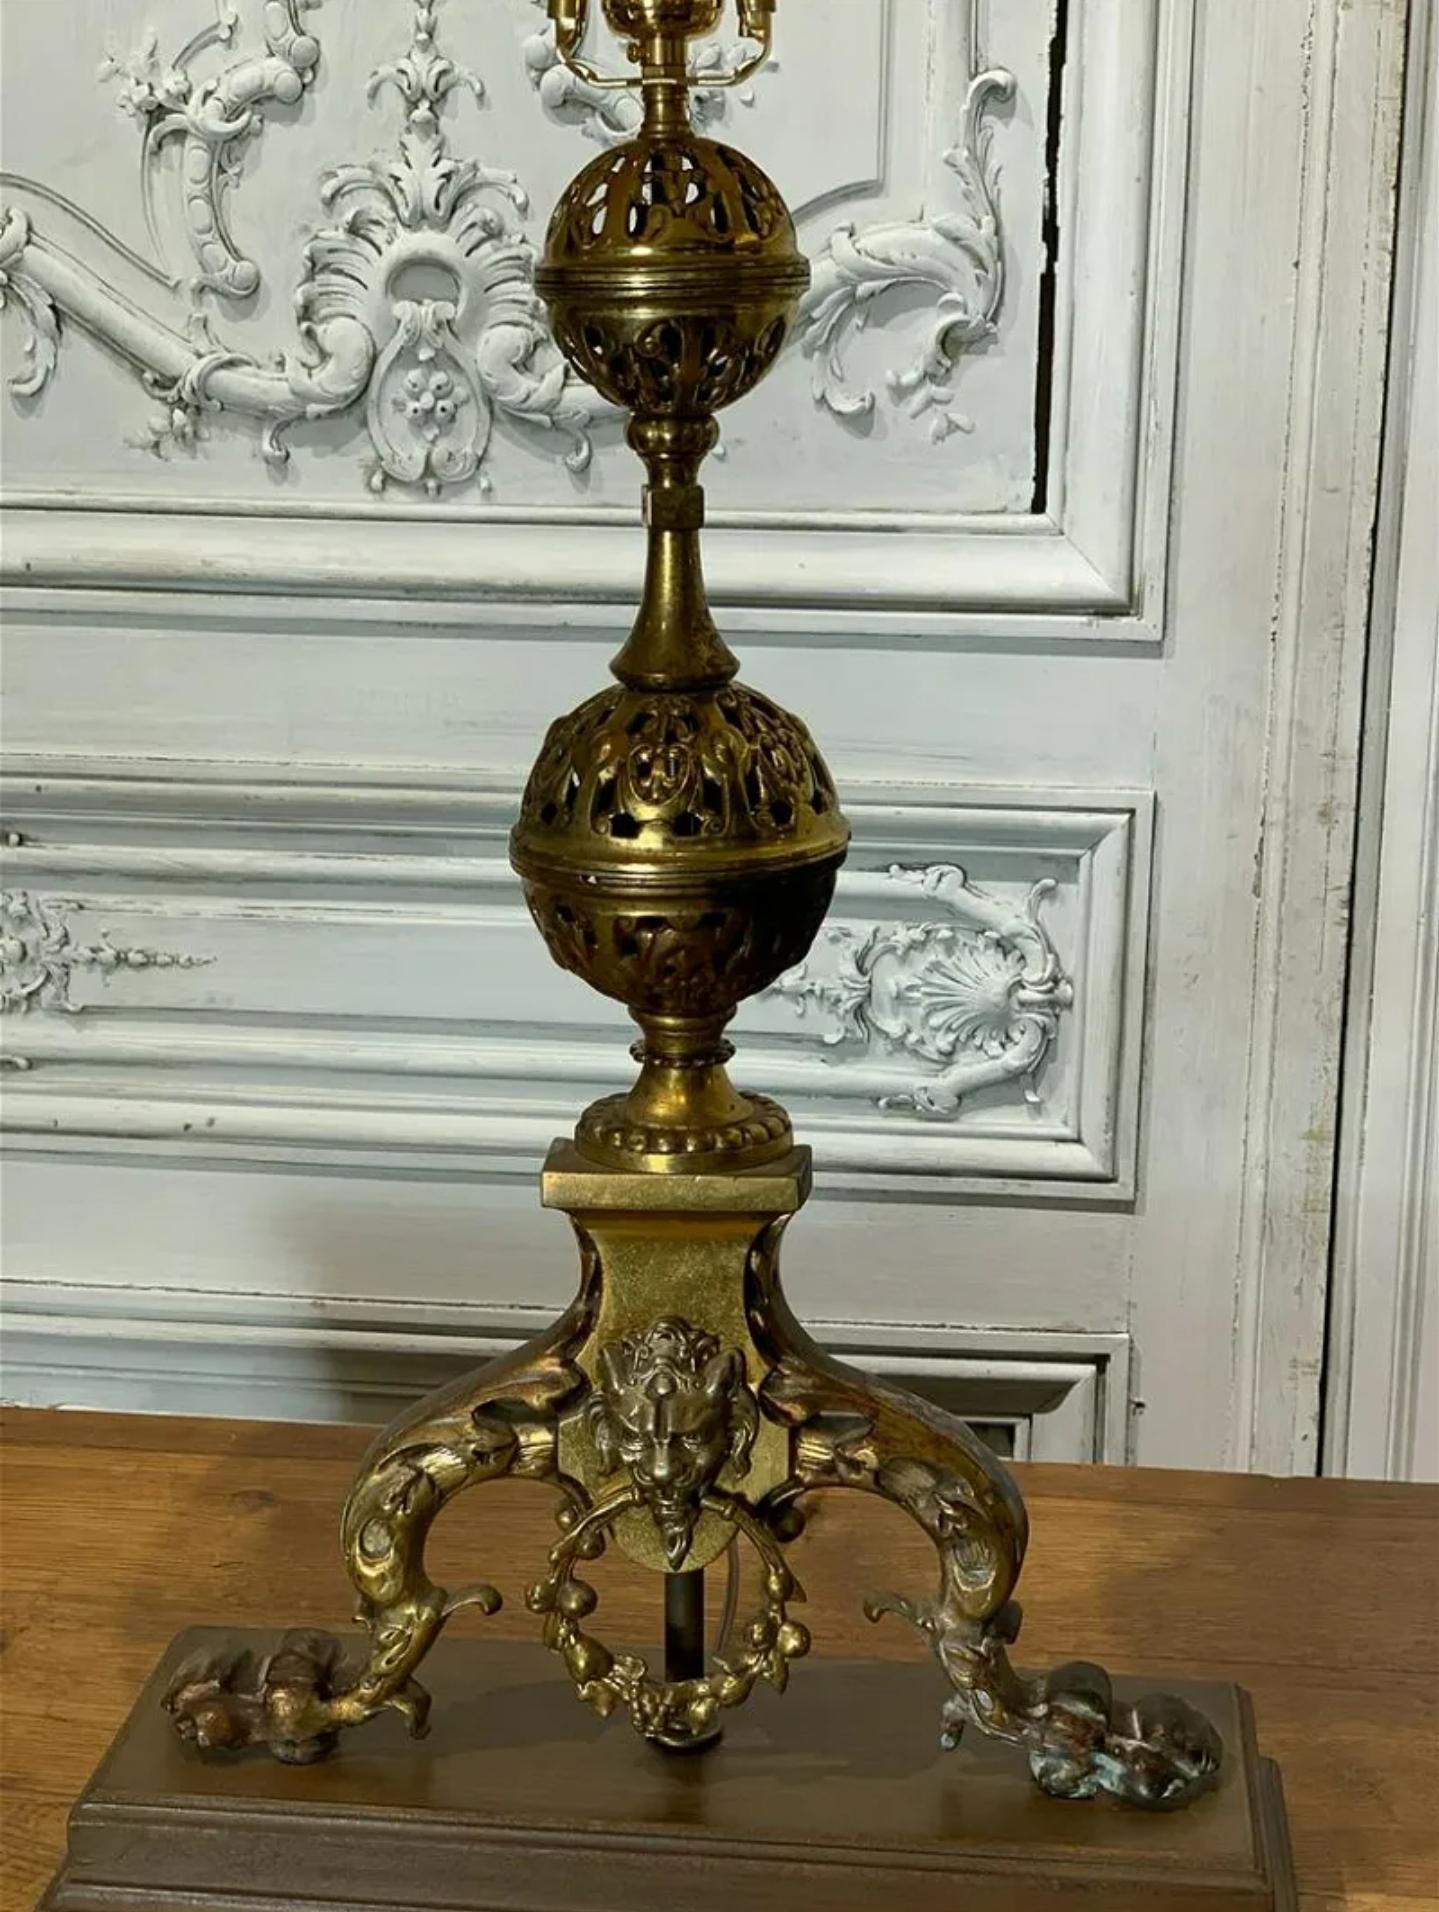 19th Century French Gothic Revival Andirons Mounted As Table Lamps - A Pair  For Sale 15